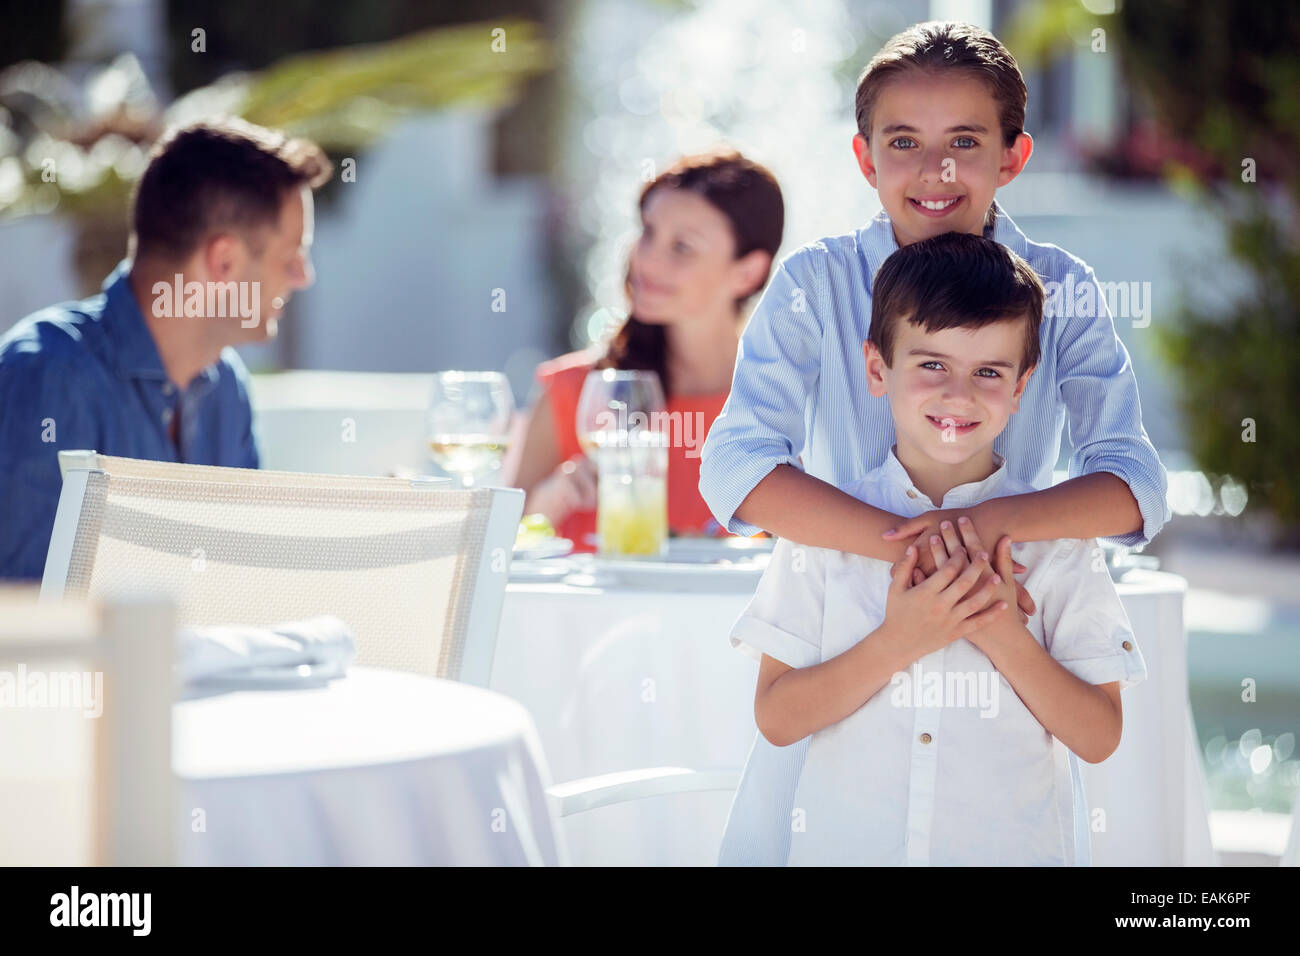 Portrait of smiling brother and sister, parents sitting at table in background Stock Photo